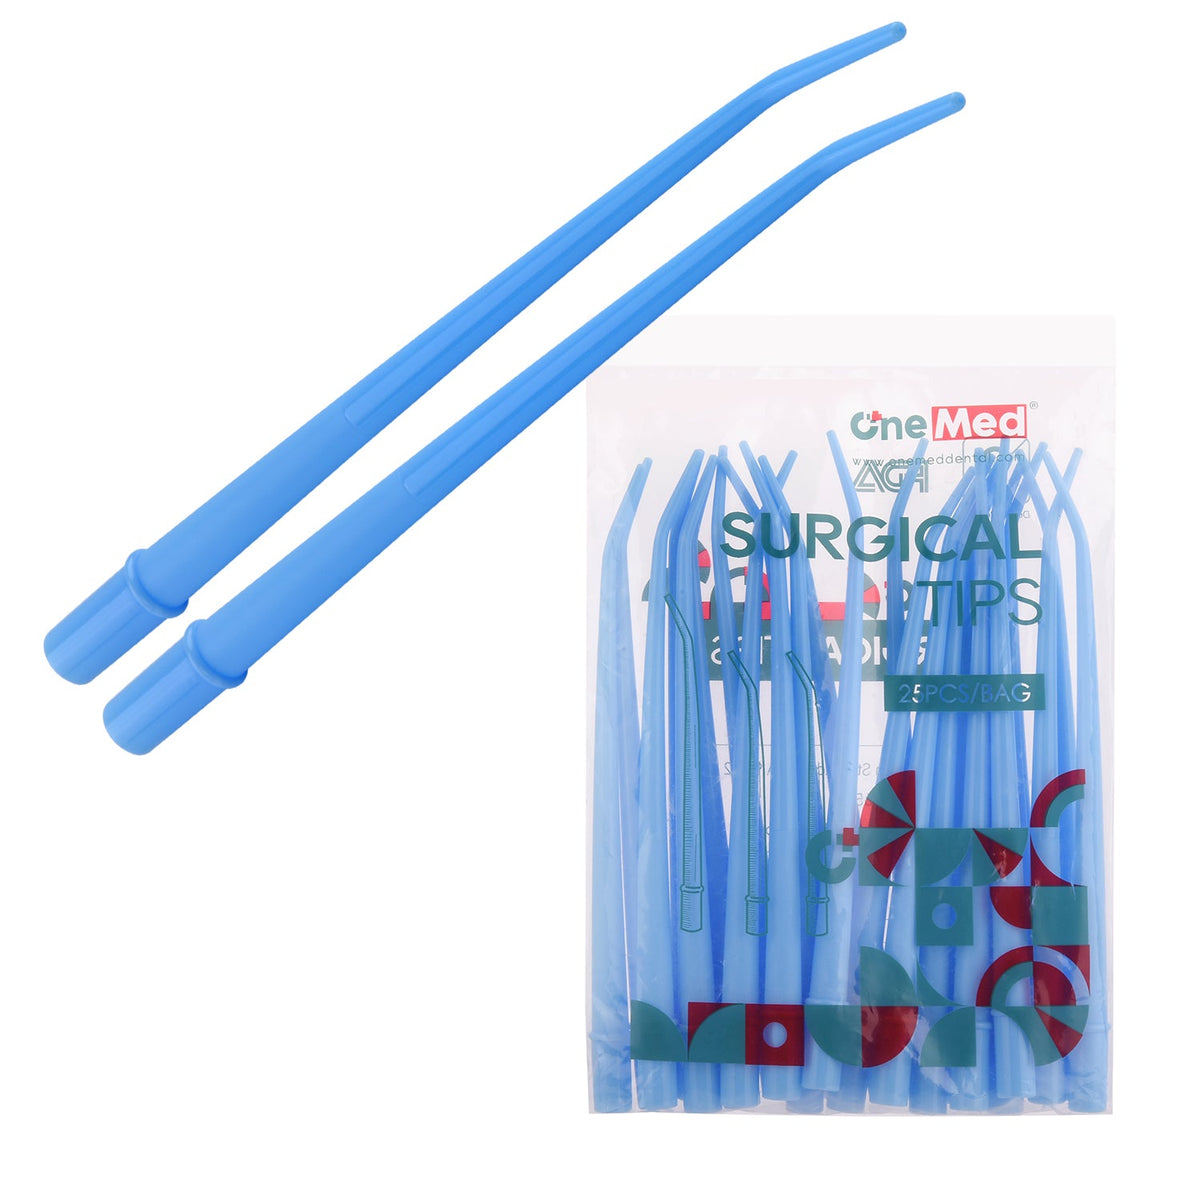 250(10 Bags) OneMed Dental Disposable Small Blue 1/16" Surgical Aspirator Tips